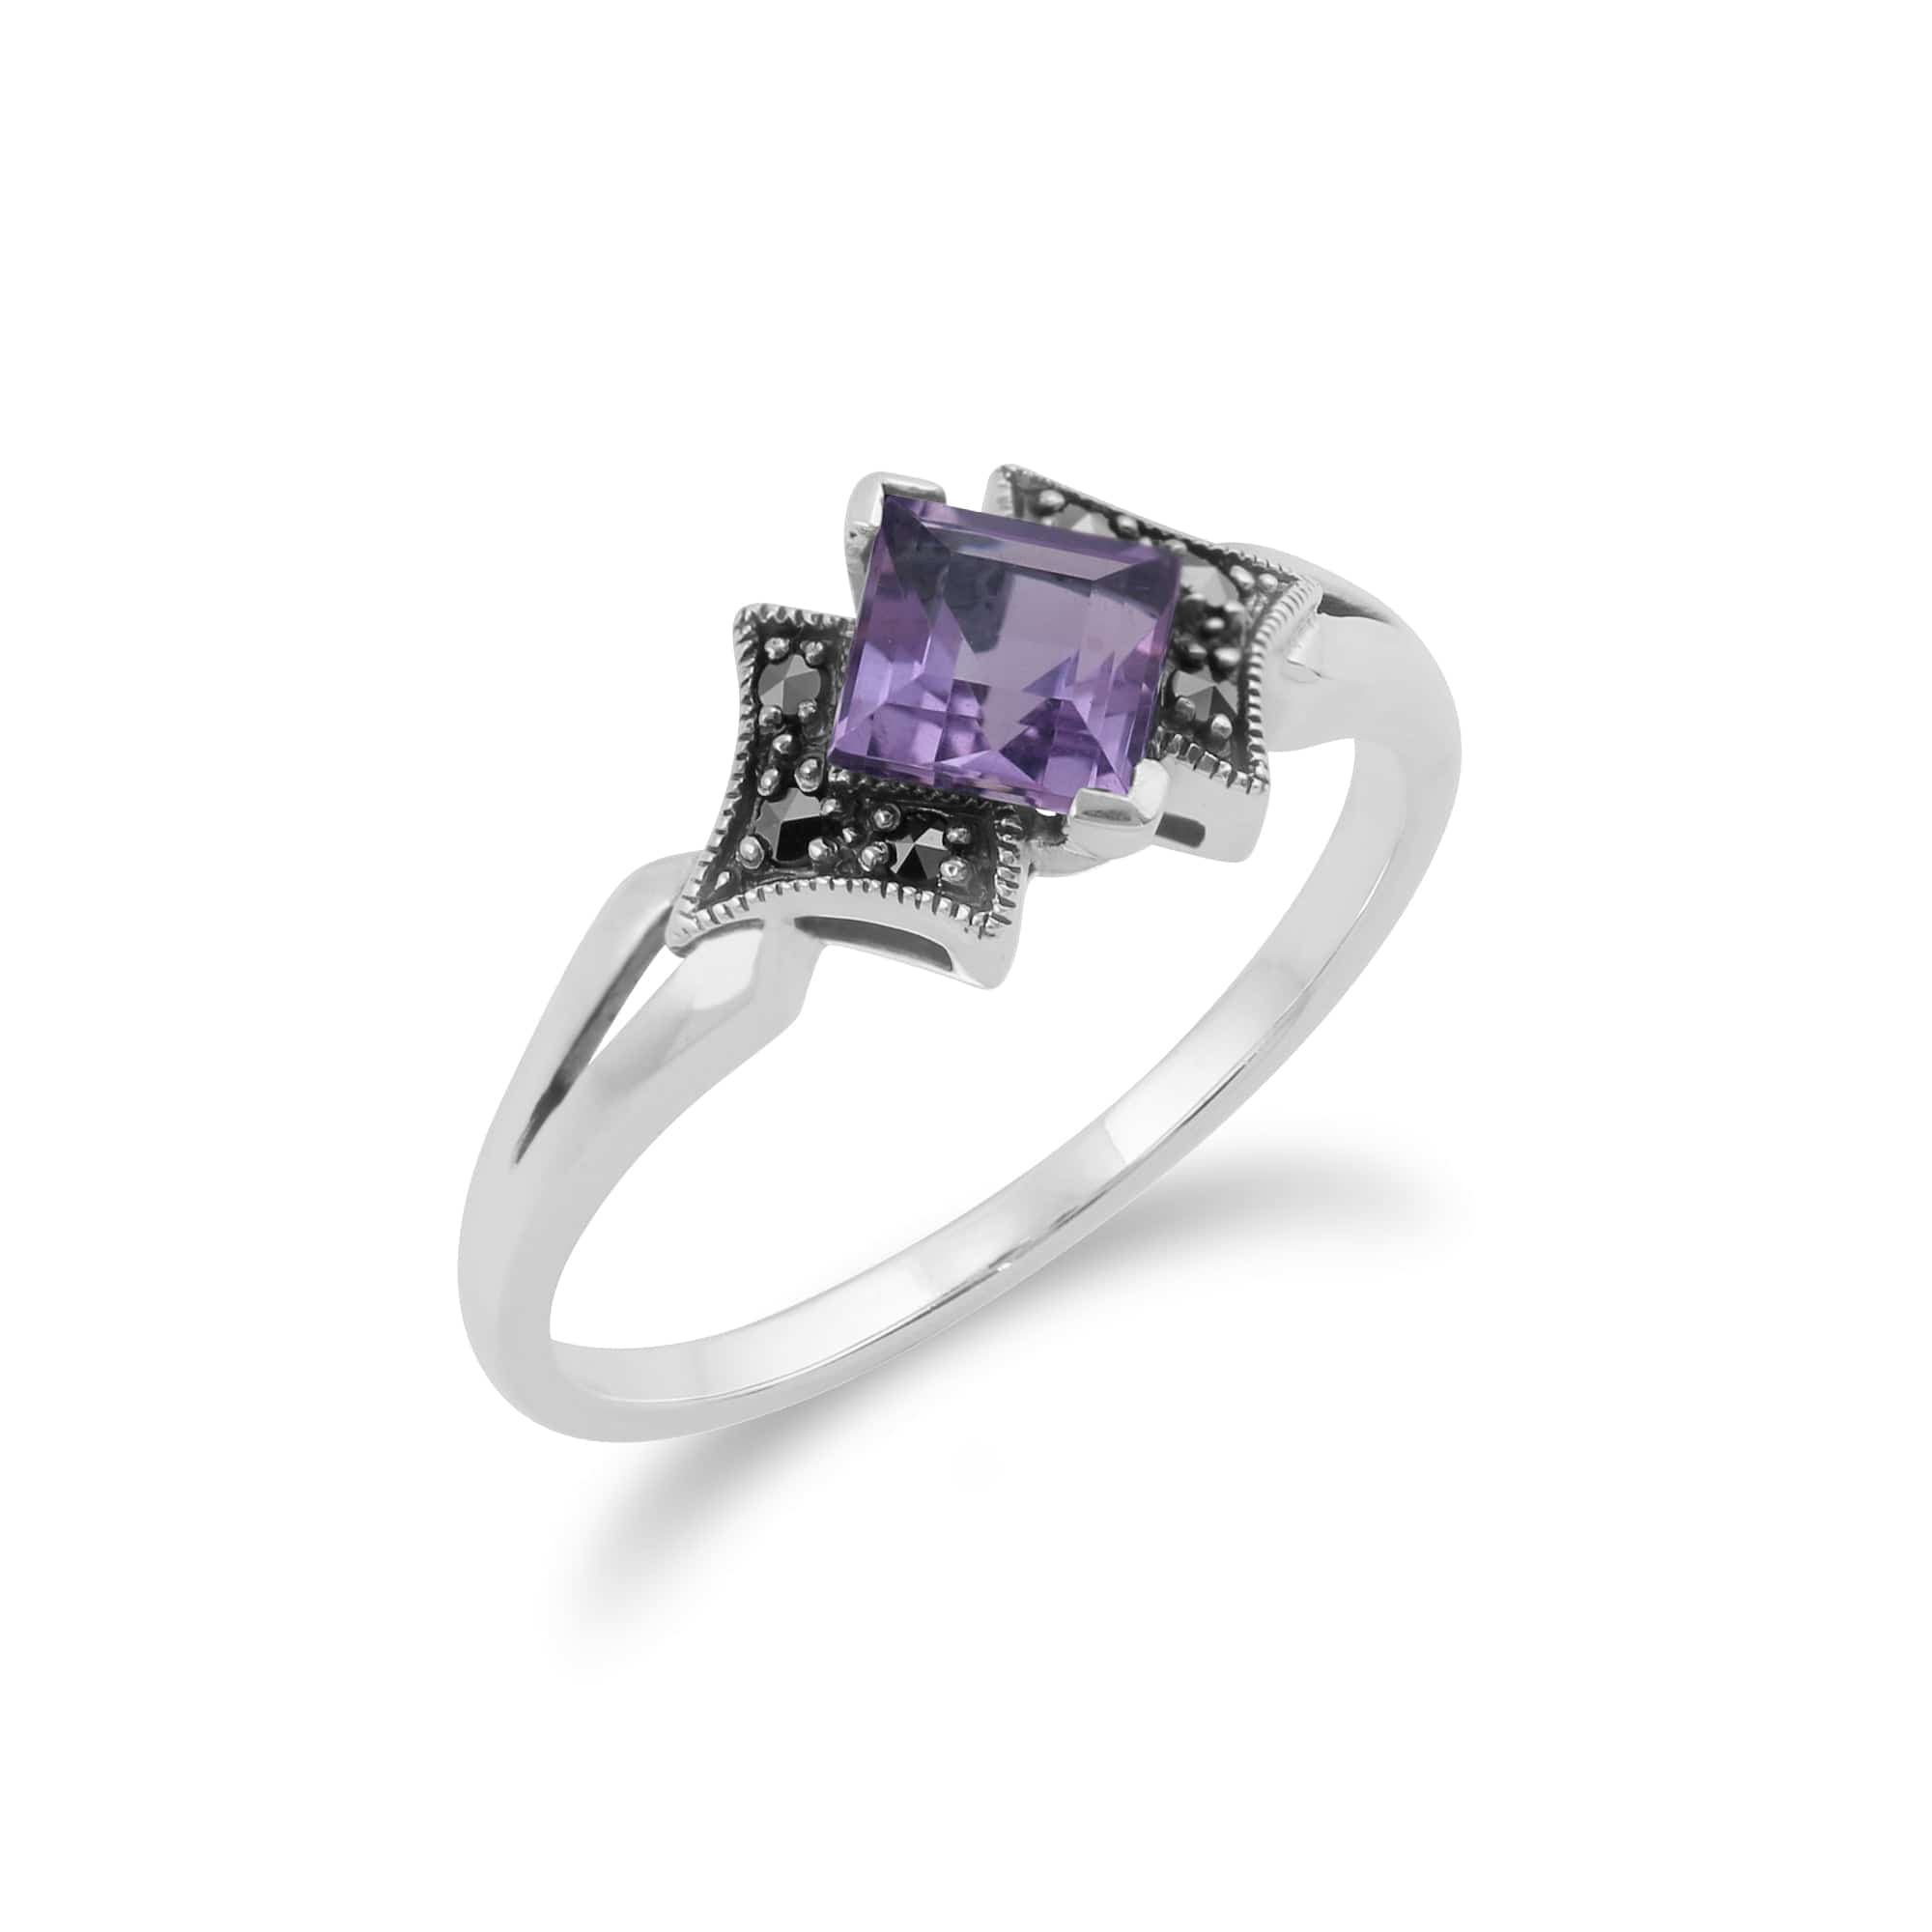 214R393303925 Art Deco Style Square Amethyst & Marcasite Ring in 925 Sterling Silver 2